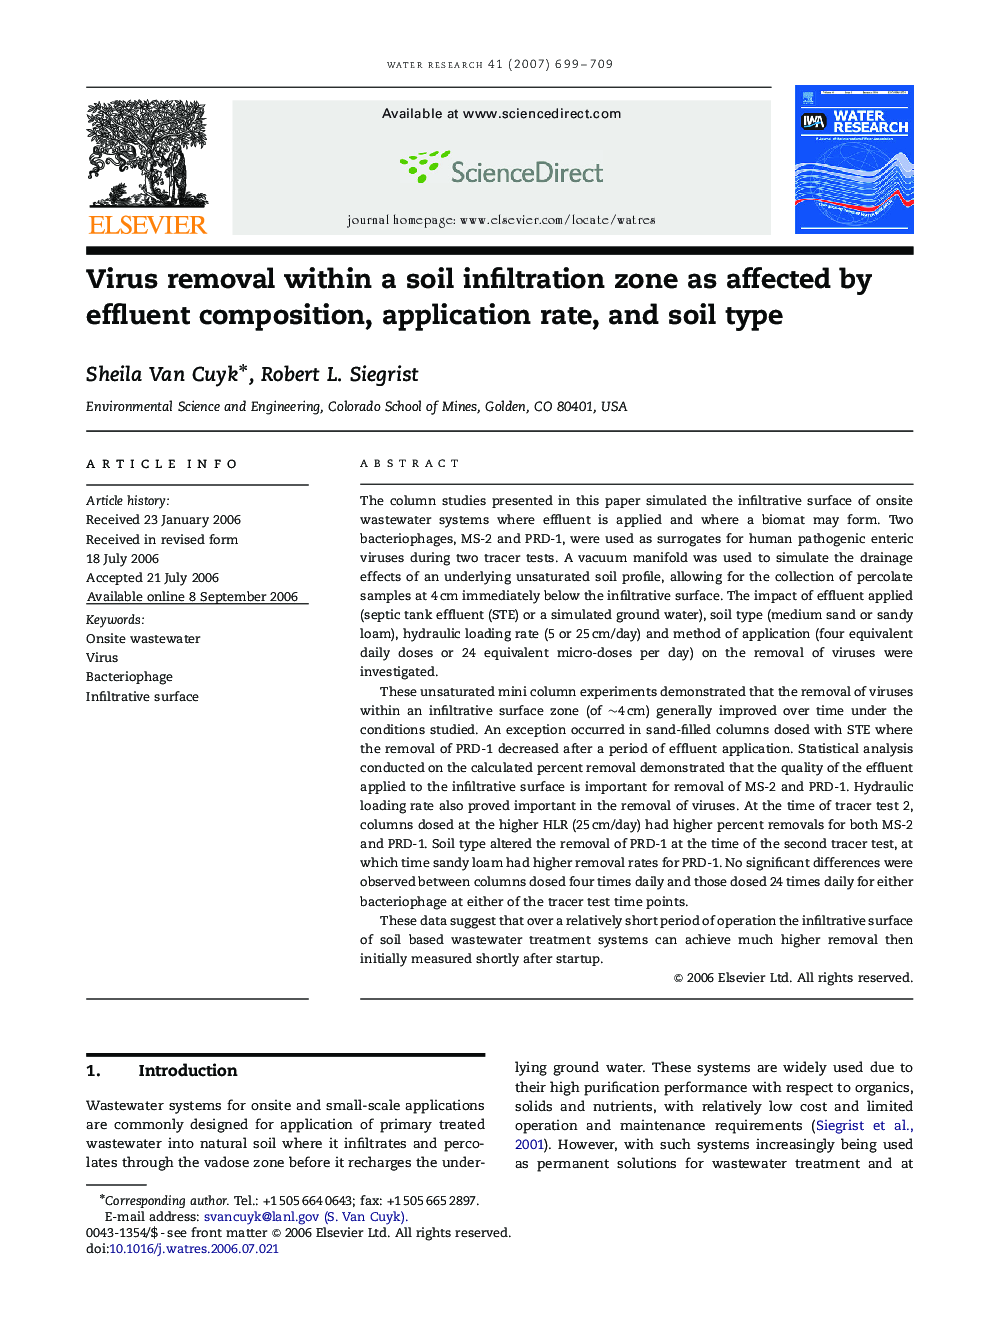 Virus removal within a soil infiltration zone as affected by effluent composition, application rate, and soil type